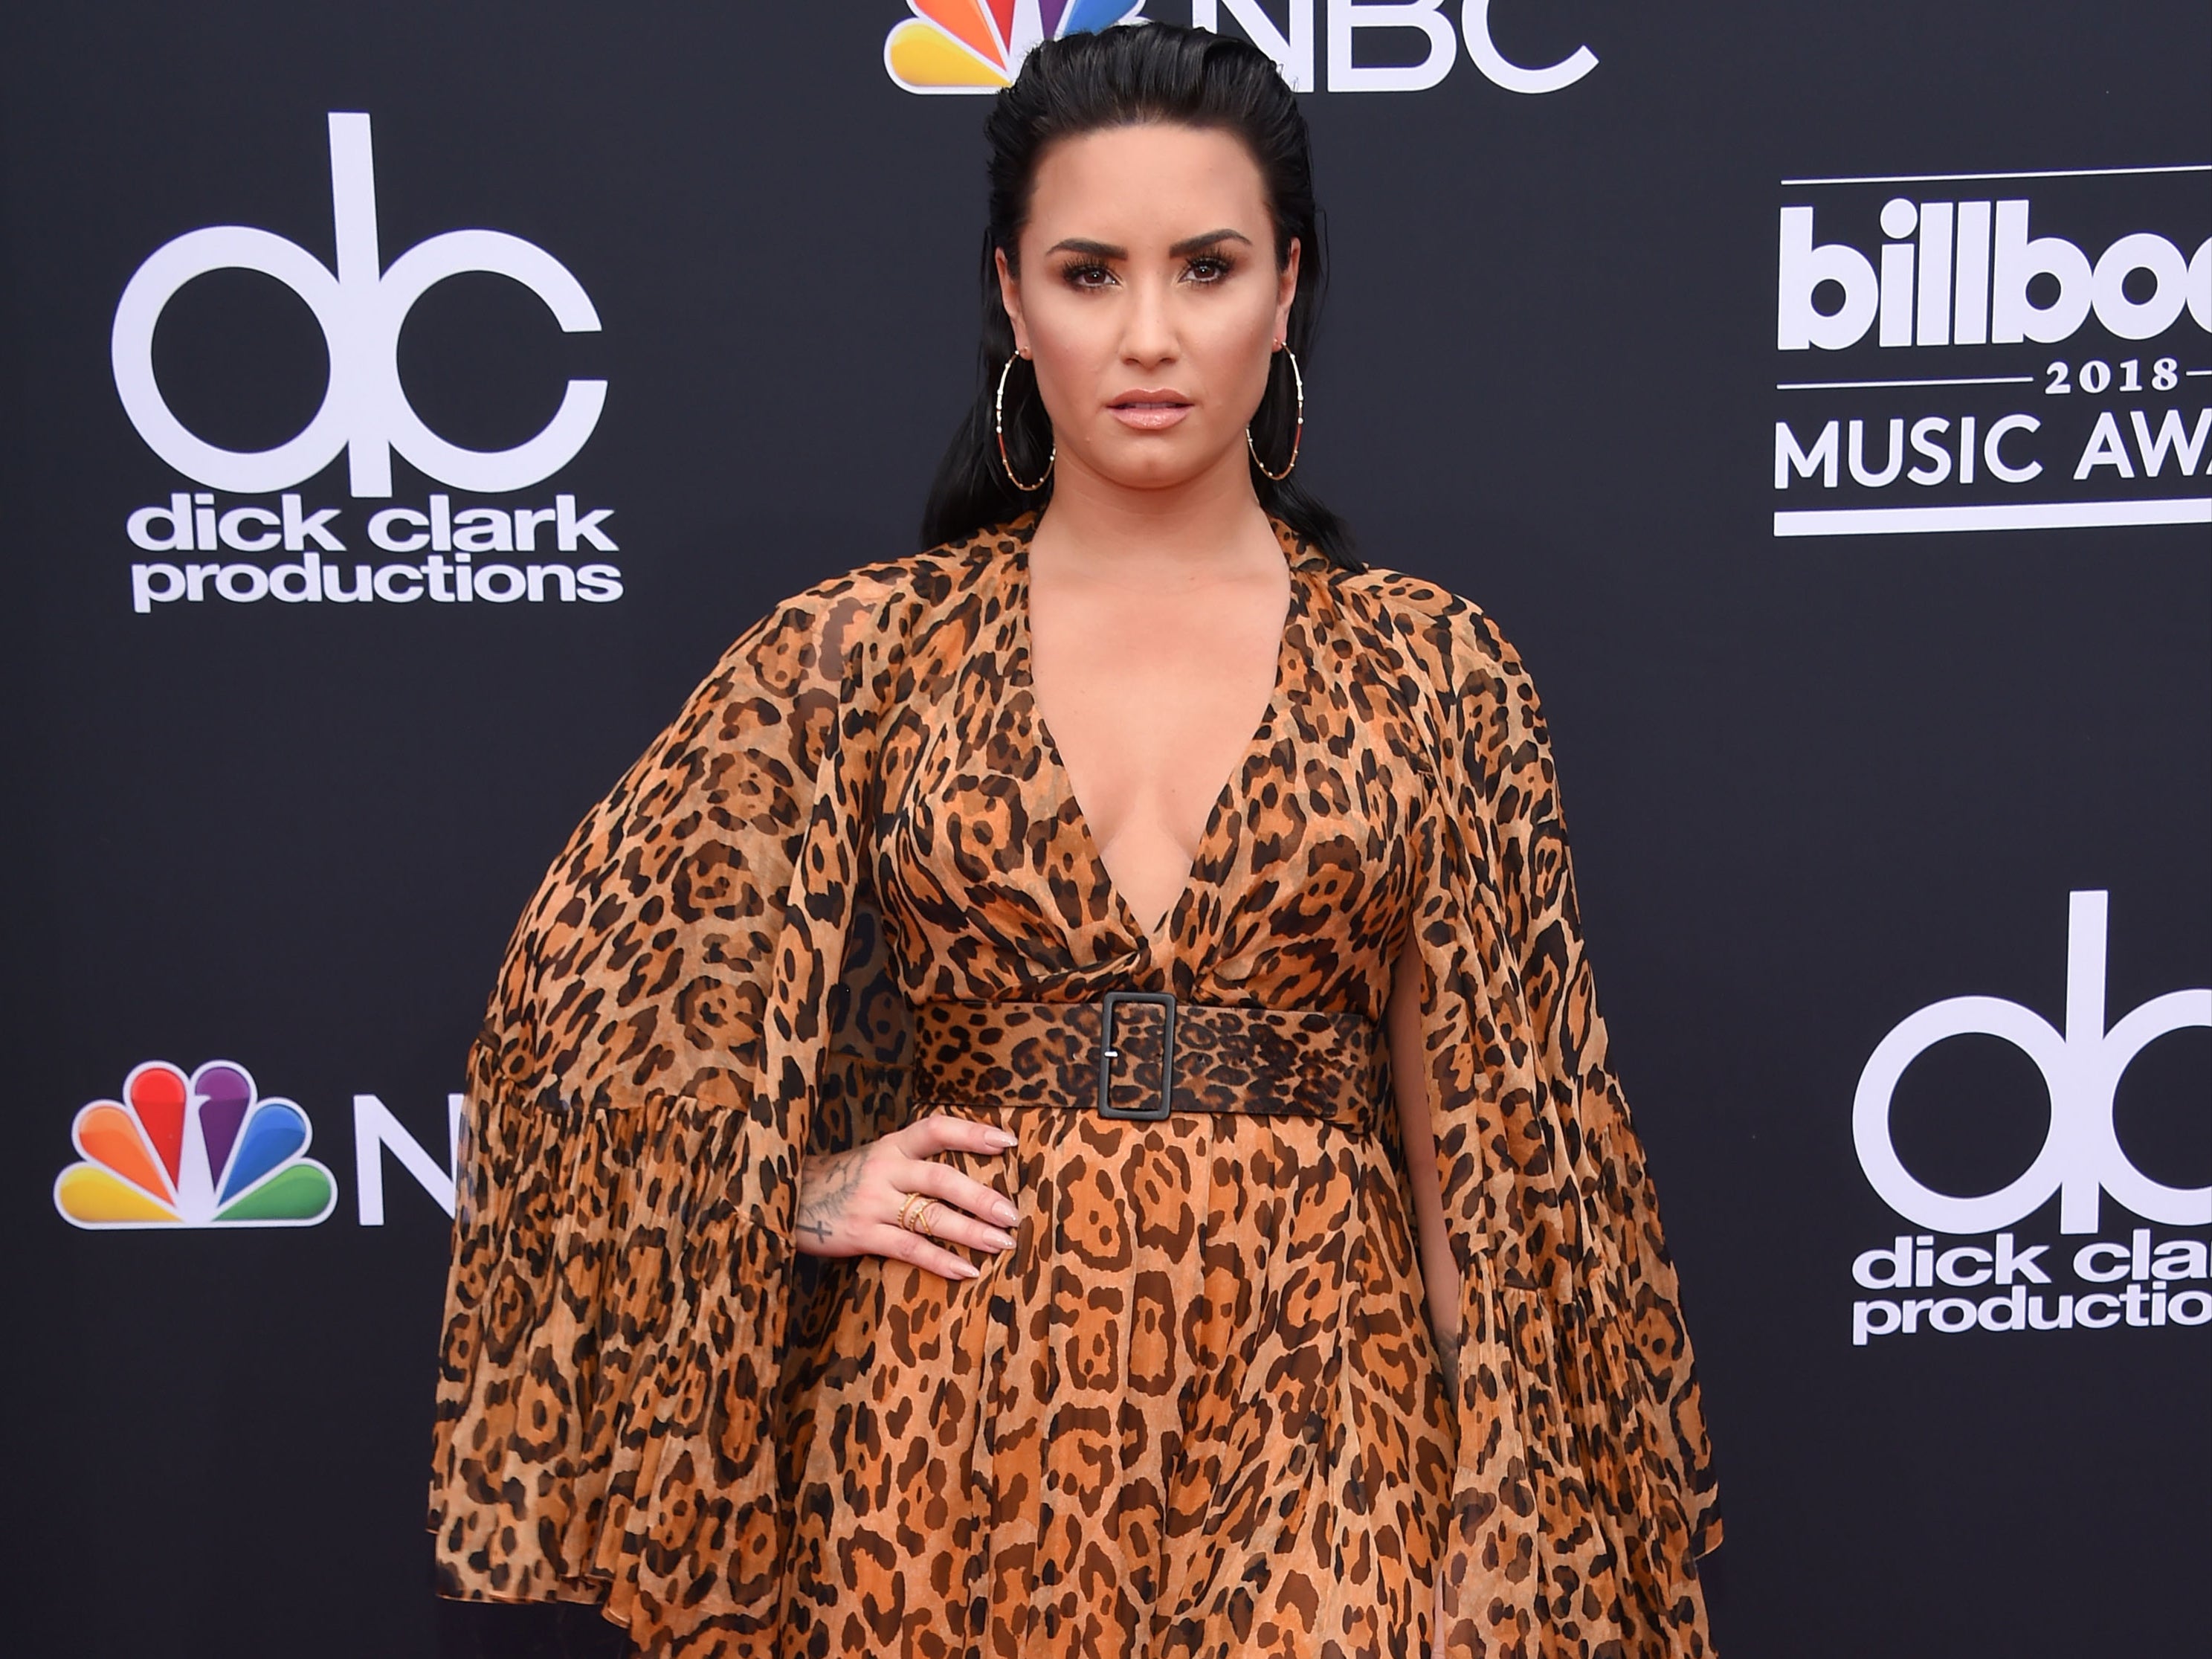 Demi Lovato opens up about eating disorder recovery